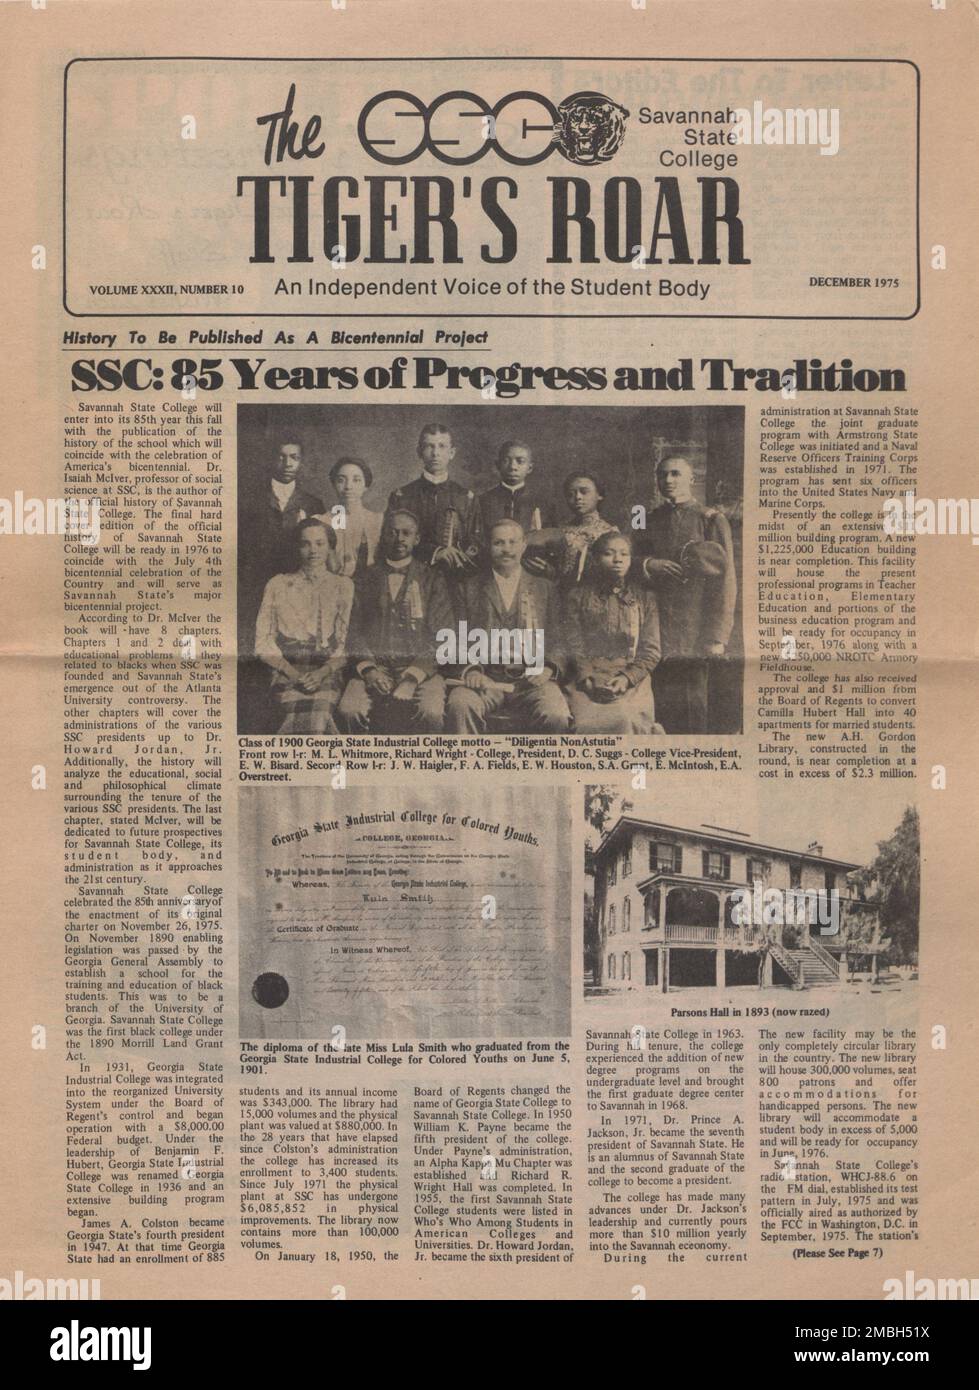 The Tiger's Roar: An Independent Voice of the Student Body, Volume XXXII, 1975-12. 'History to be Published as a Bicentennial Project. SSC [Savannah State College]: 85 Years of Progress and Tradition. [Portrait photo]. Class of 1900 Georgia State Industrial College motto - &quot;Diligentia non Astutia&quot;. Front row l-r: M. L. Whitmore, Richard Wright - College, President, D. C. Suggs - College Vice-President, E. W. Bisard. Second Row l-r: J. W. Haigler, F. A. Fields, E. W. Houston, S. A. Grant, E. McIntosh, E. A. Overstreet'. Photos of 'The diploma of the late Miss Lula Smith who graduated Stock Photo